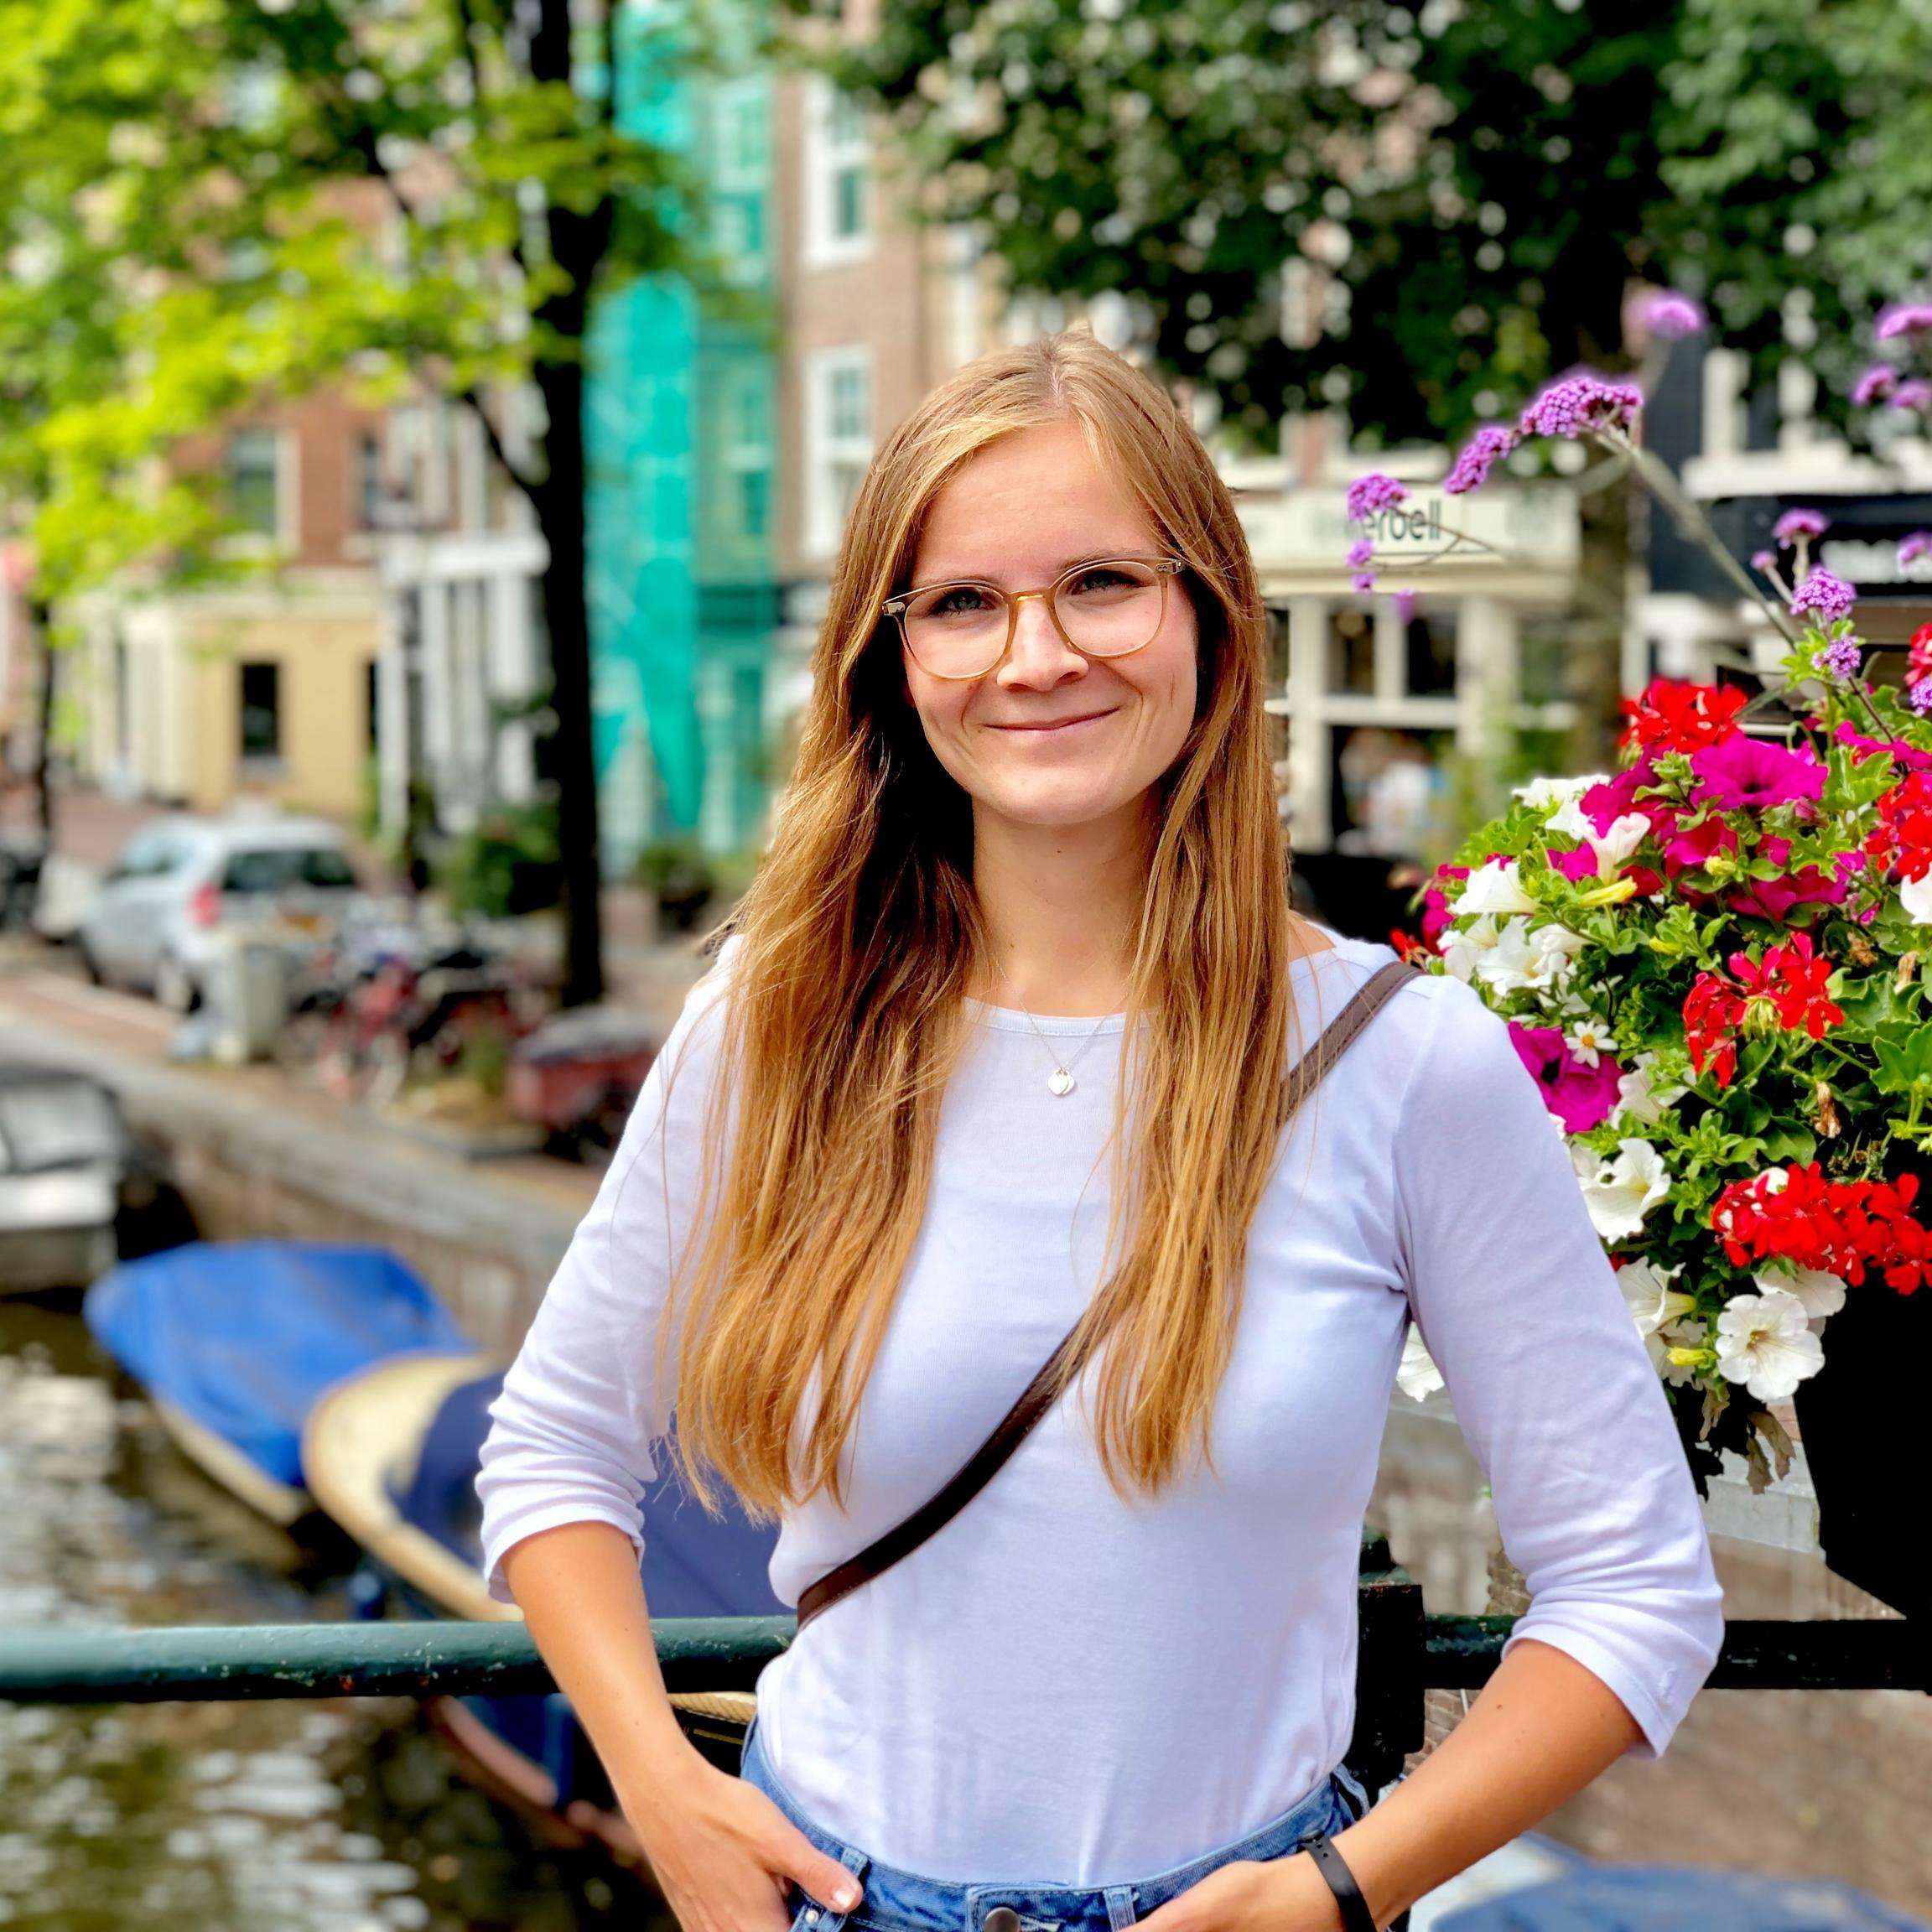 Young smiling woman with glasses in front of canals in Amsterdam.